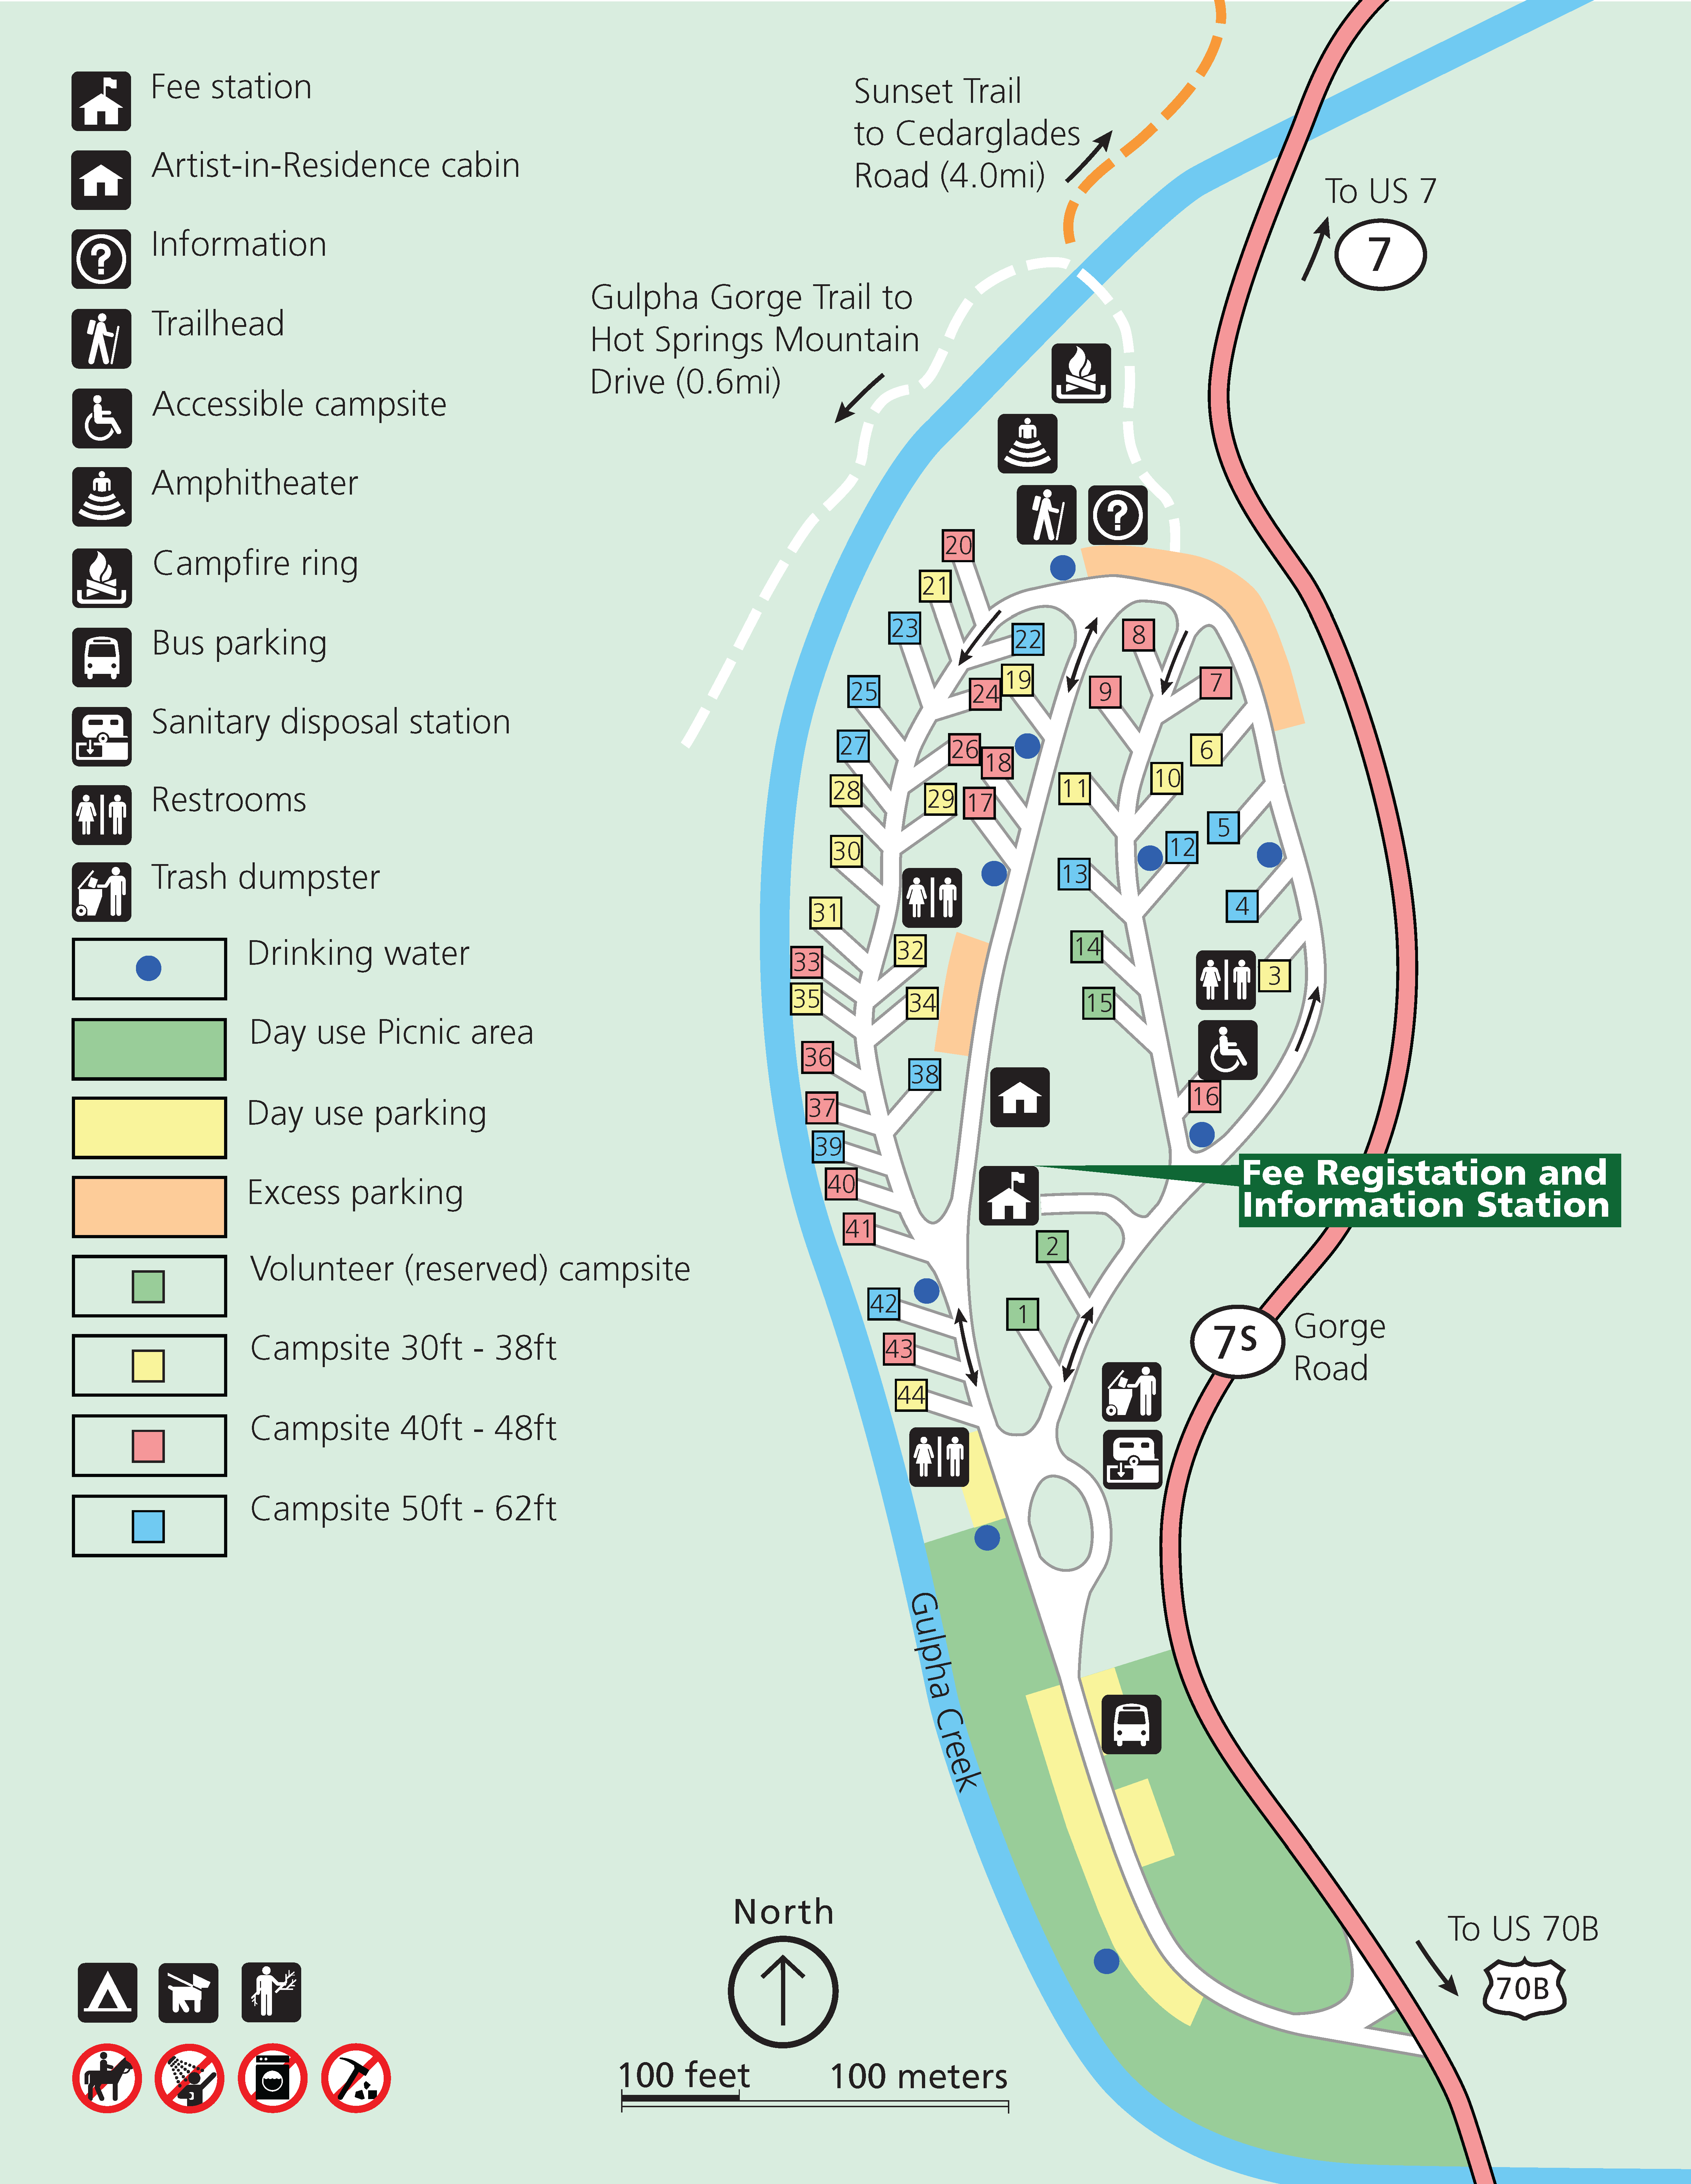 Map outlining site locations and amenities in Gulpha Gorge.